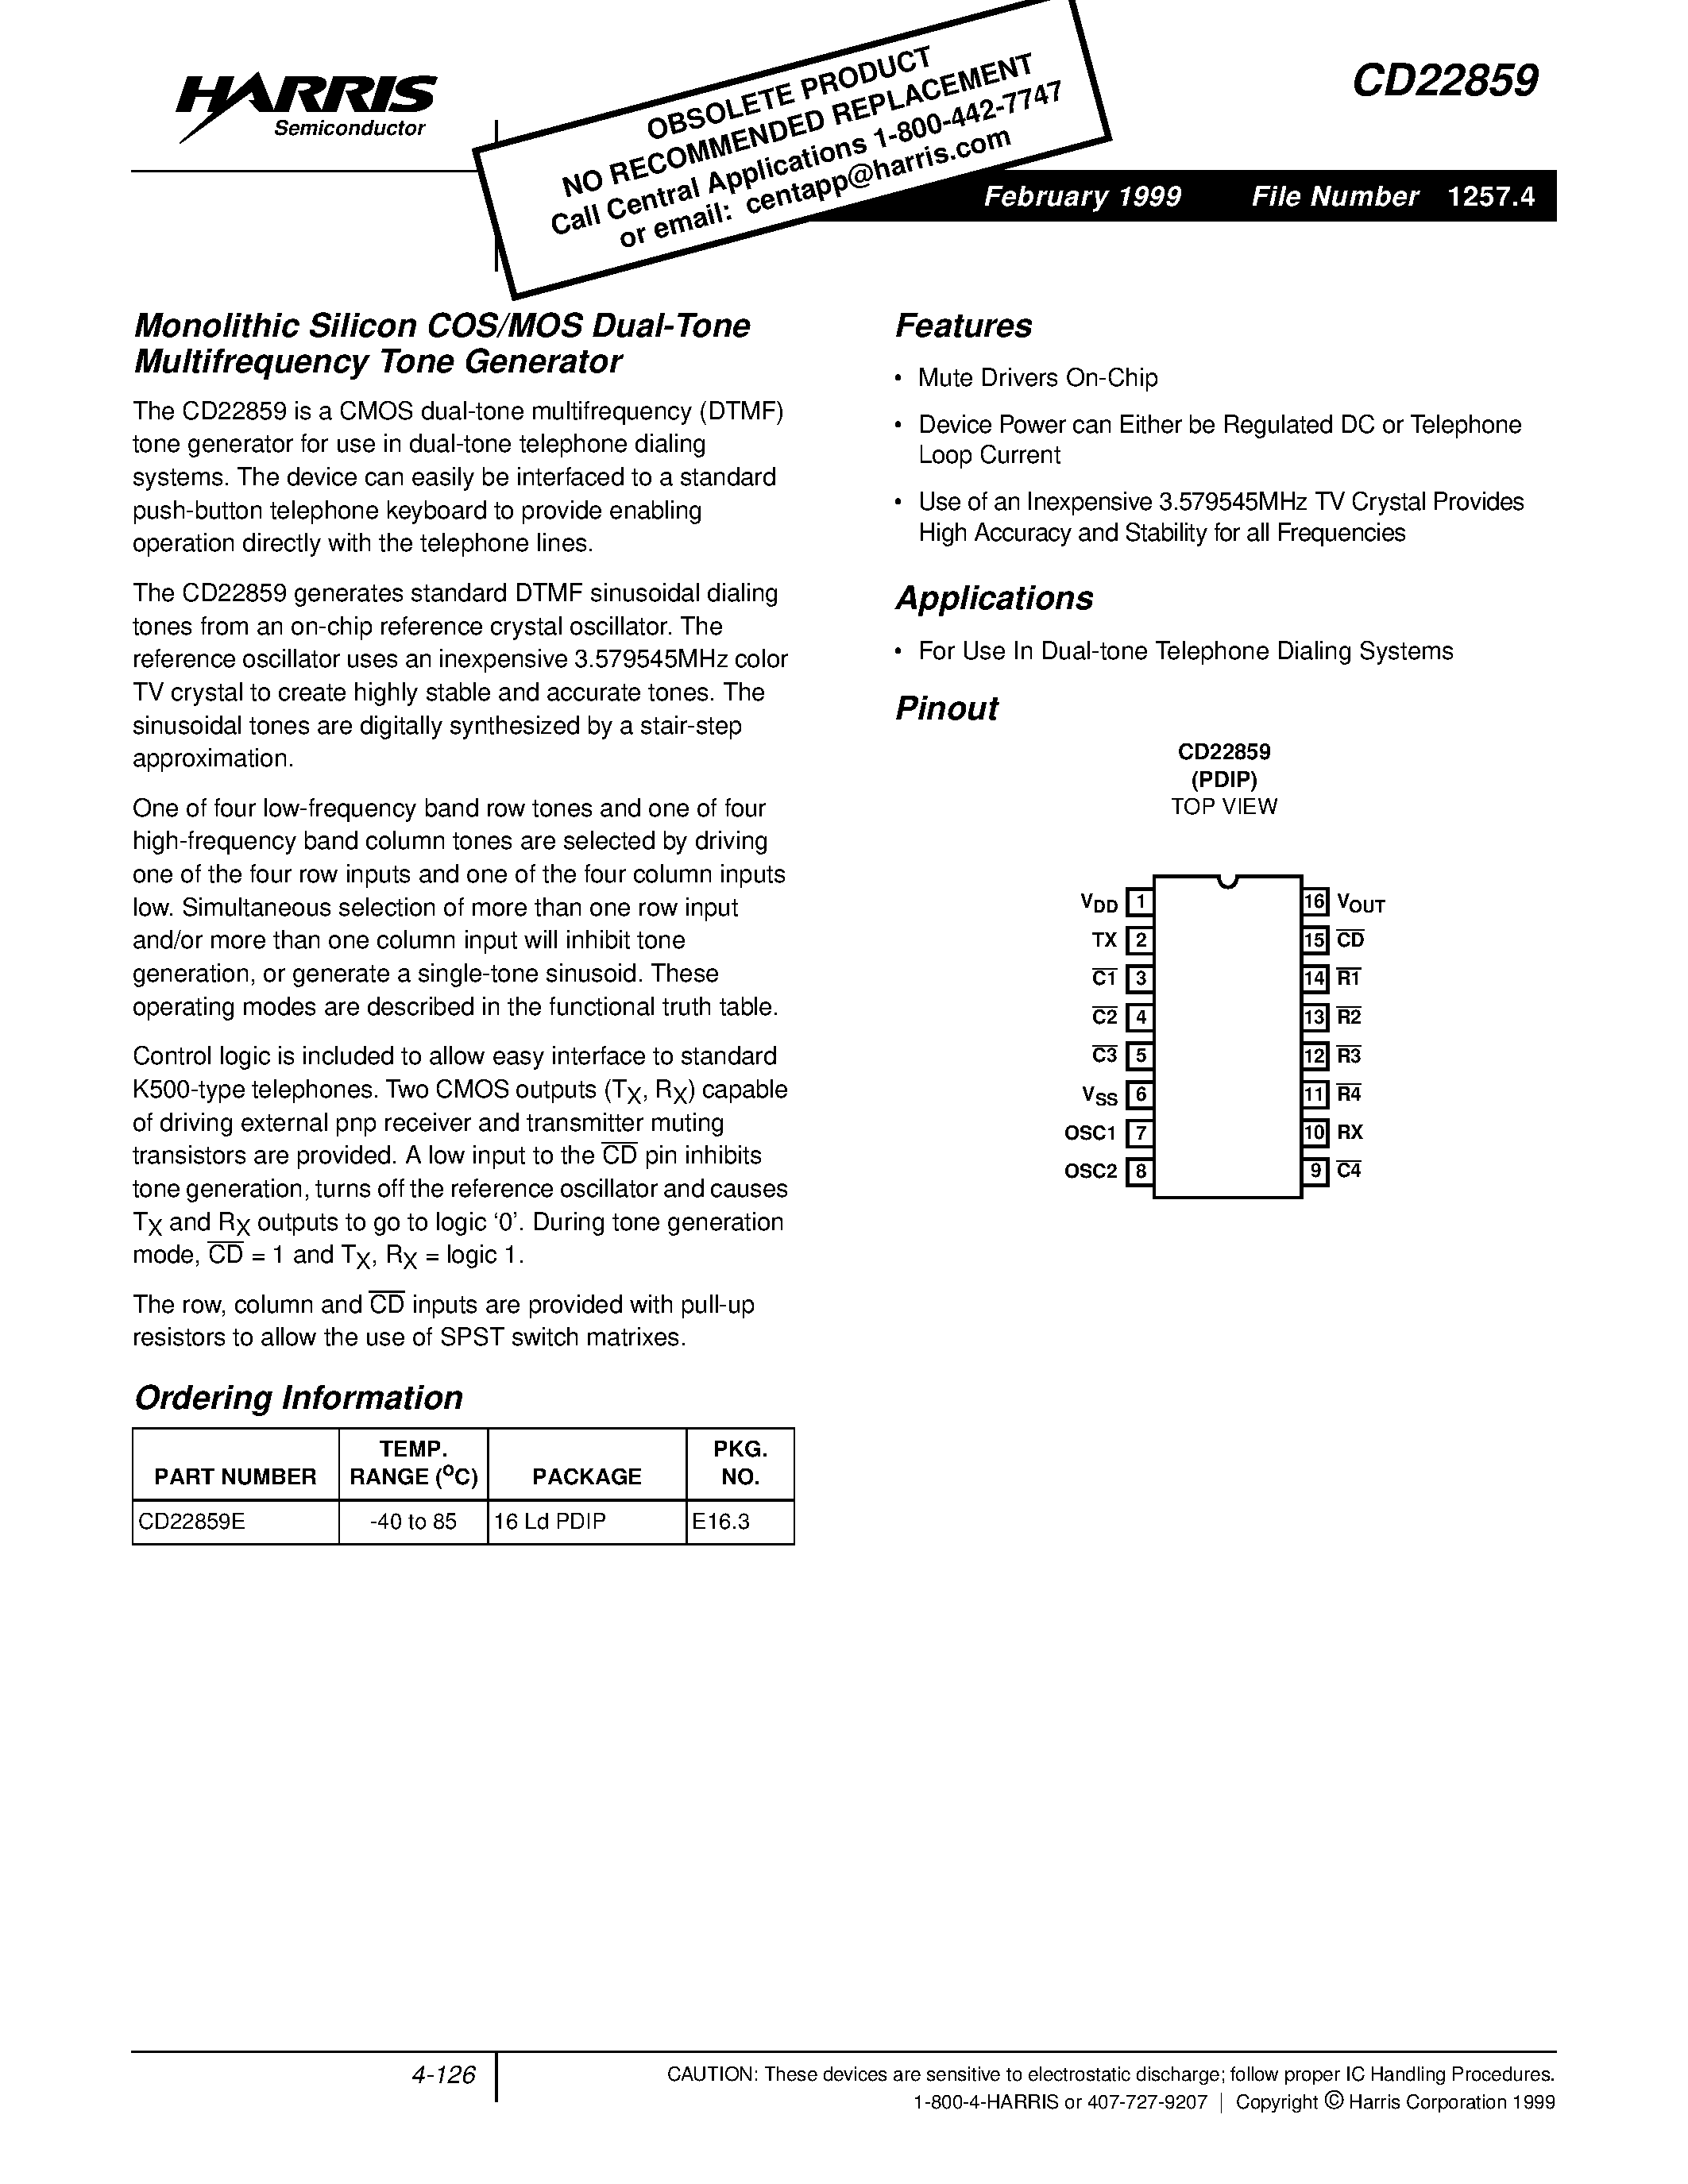 Datasheet CD22859E - Monolithic Silicon COS/MOS Dual-Tone Multifrequency Tone Generator page 1